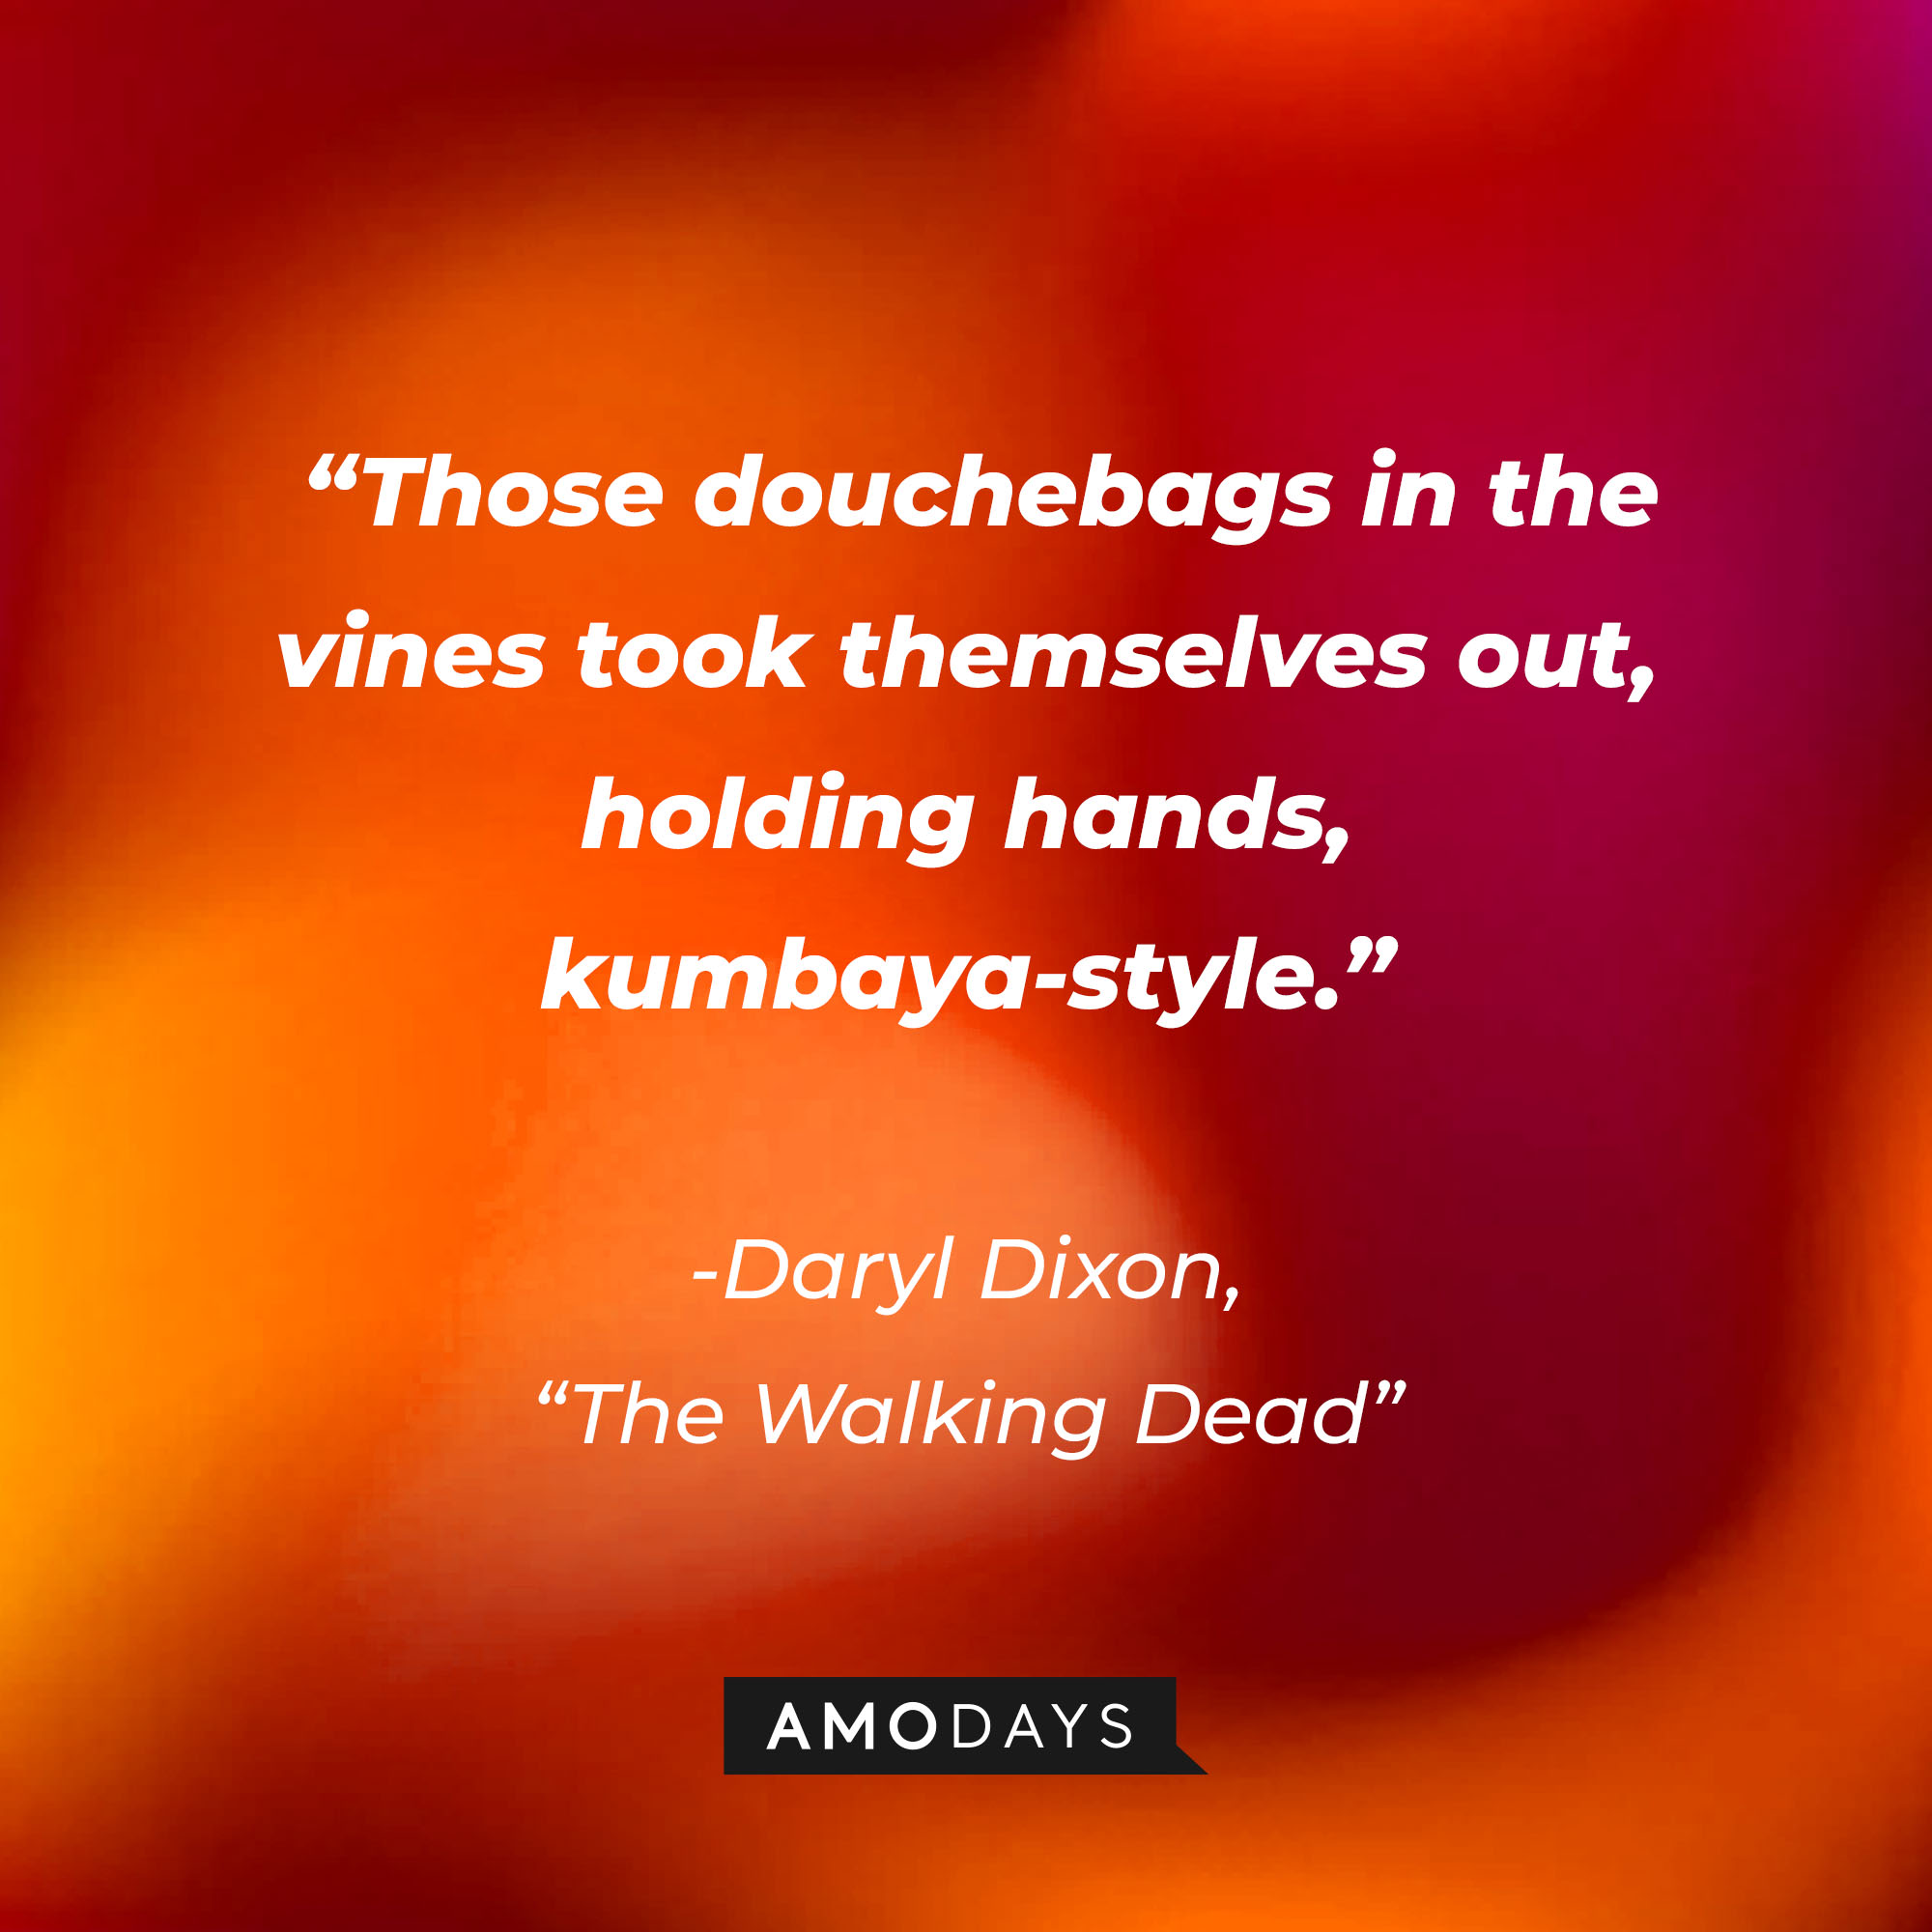 Daryl Dixon’s quote from “The Walking Dead”: “Those douchebags in the vines took themselves out, holding hands, kumbaya-style.” | Source: AmoDays